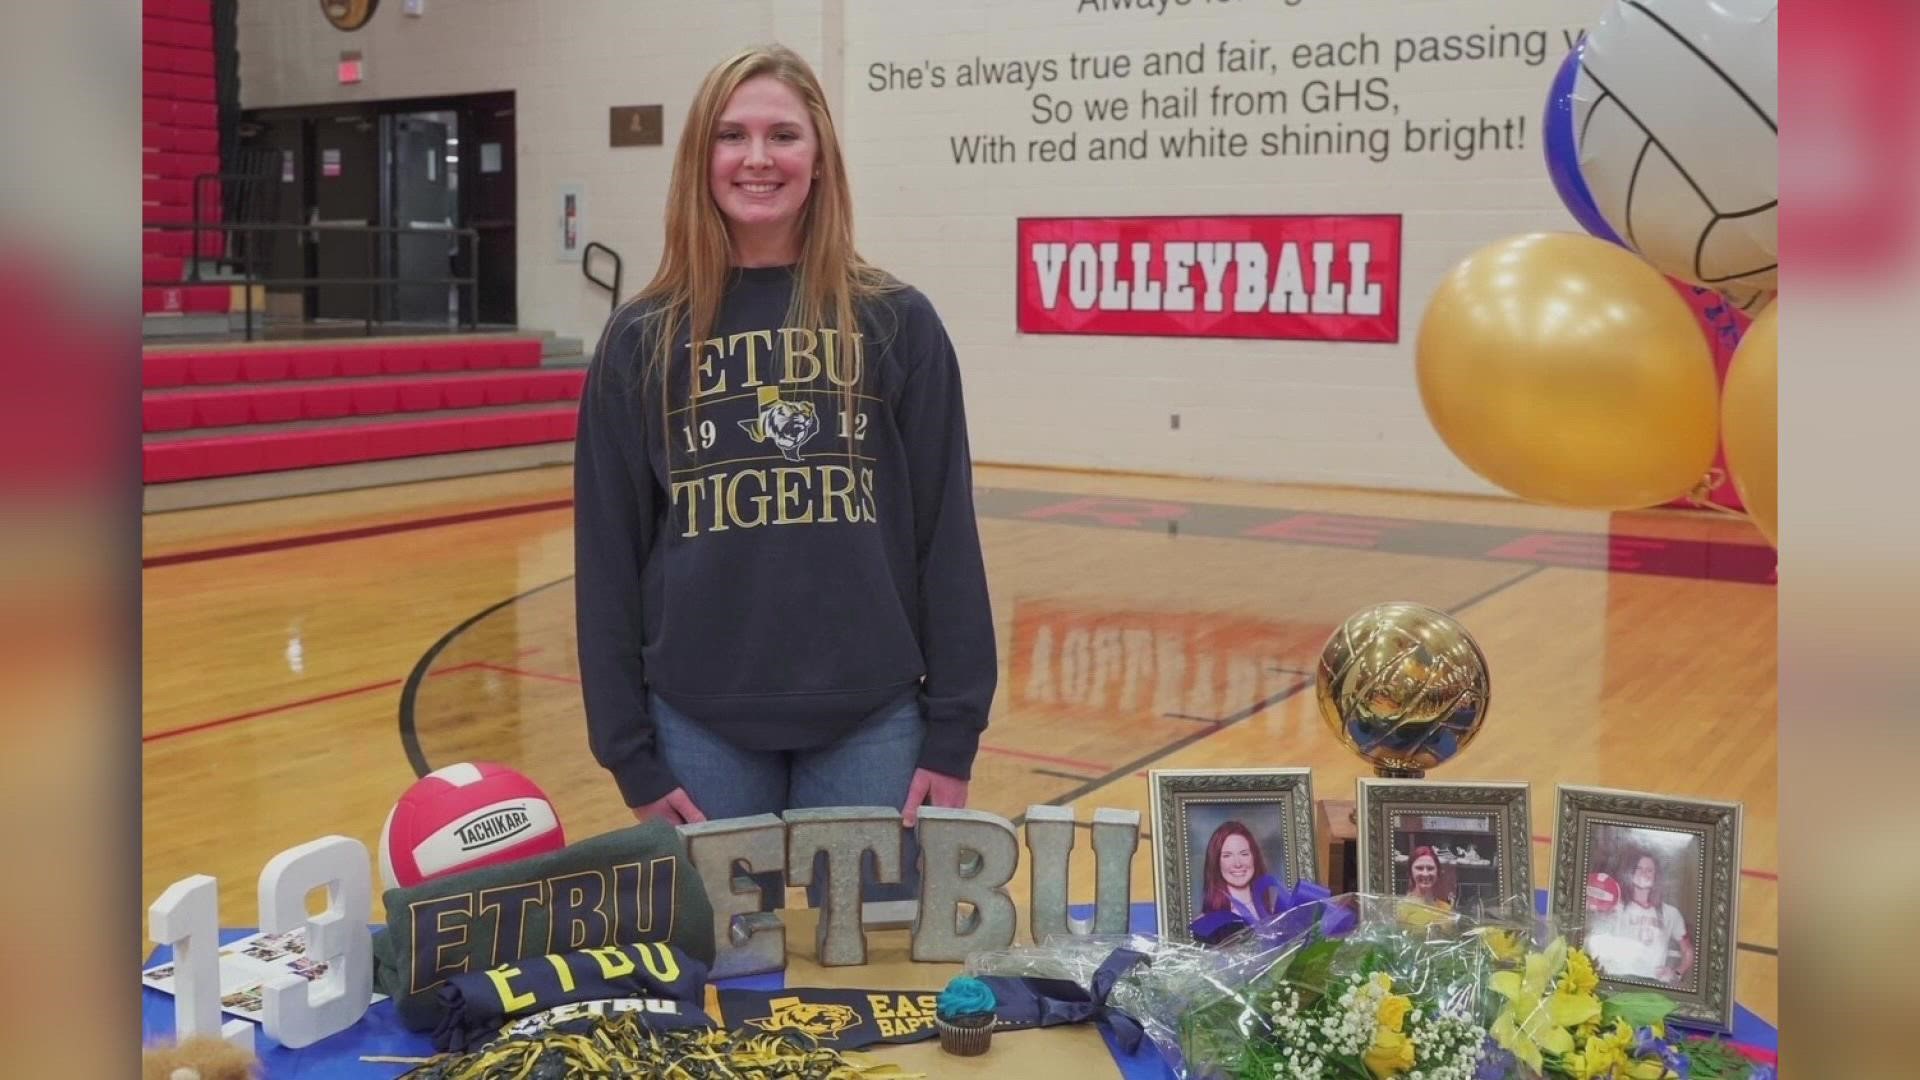 She spent all four years on the varsity volleyball team and served as captain for her senior year when she also finished with academic all-state honors.